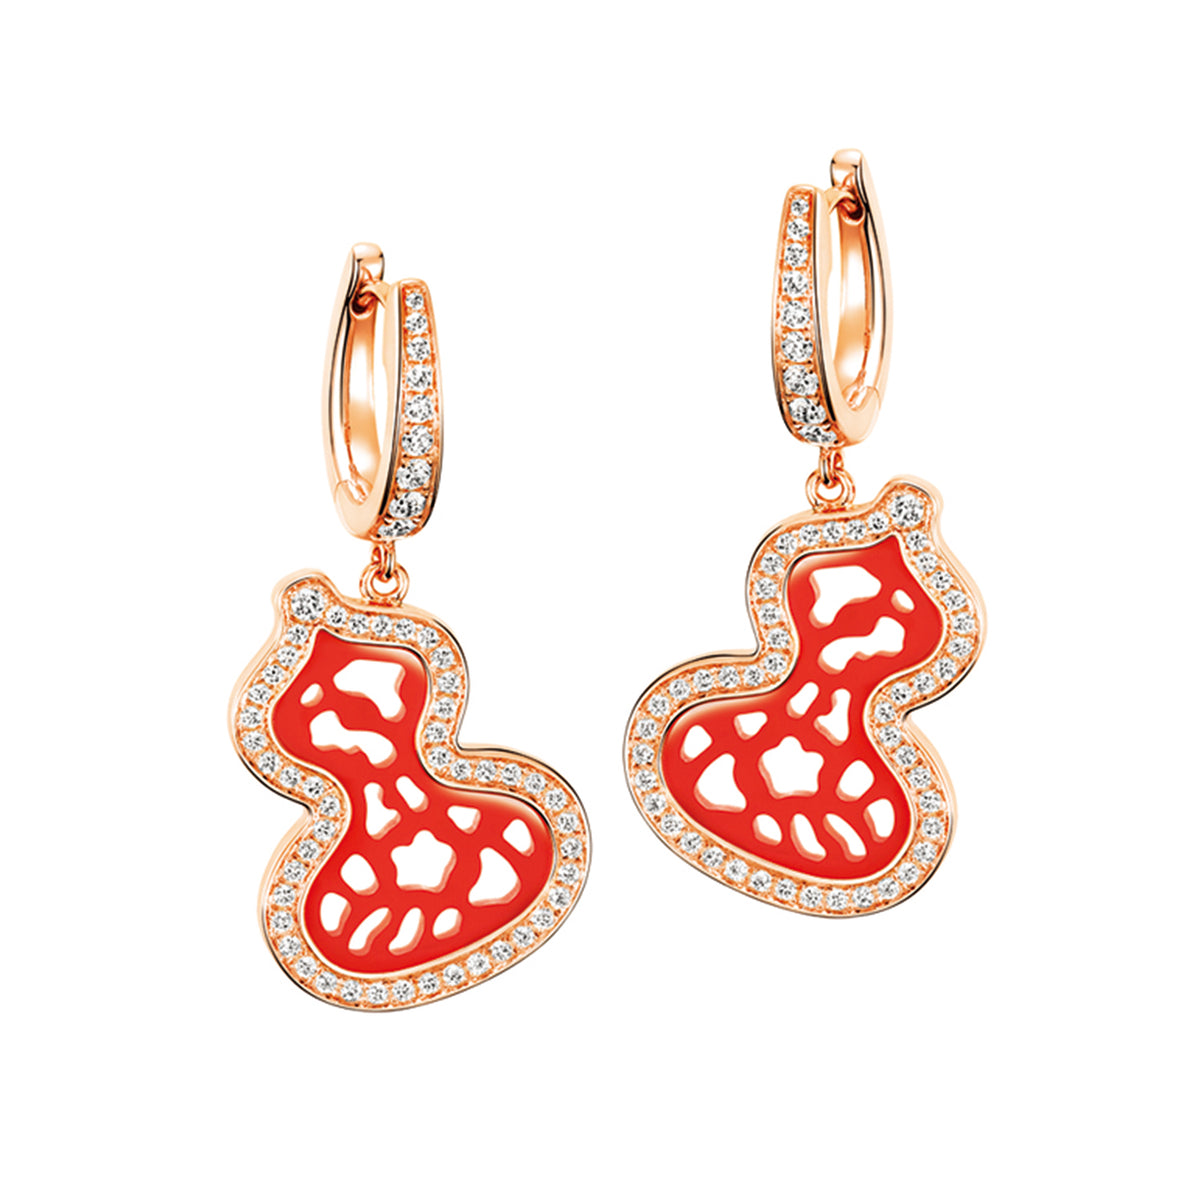 Wulu earrings in 18K rose gold with diamonds and red agate